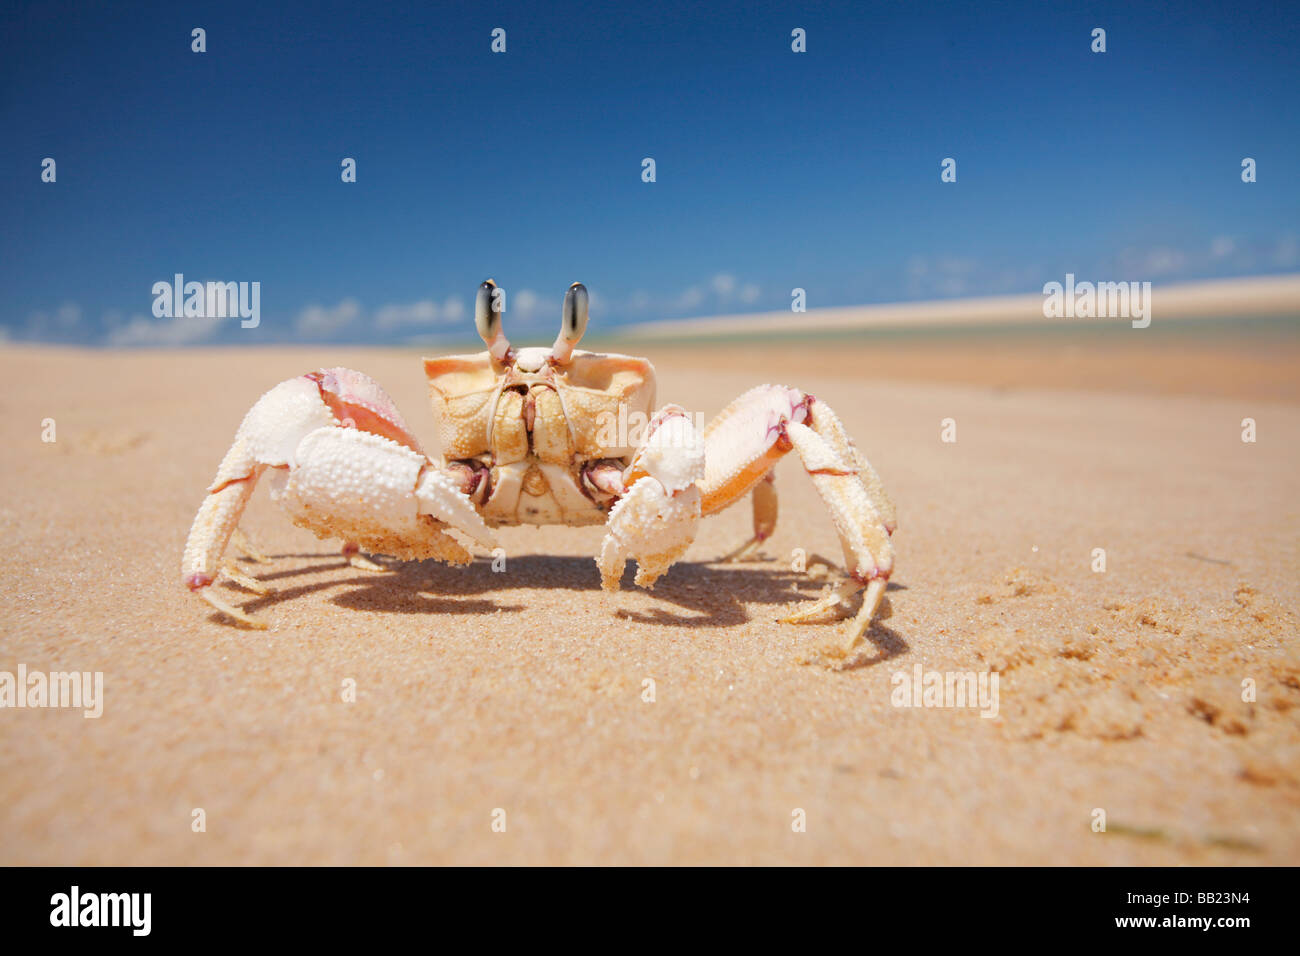 Ghost crab of the genus Ocypode on the golden sands of the Bazaruto Archipelago of the coast of Vilanculos Mozambique Stock Photo